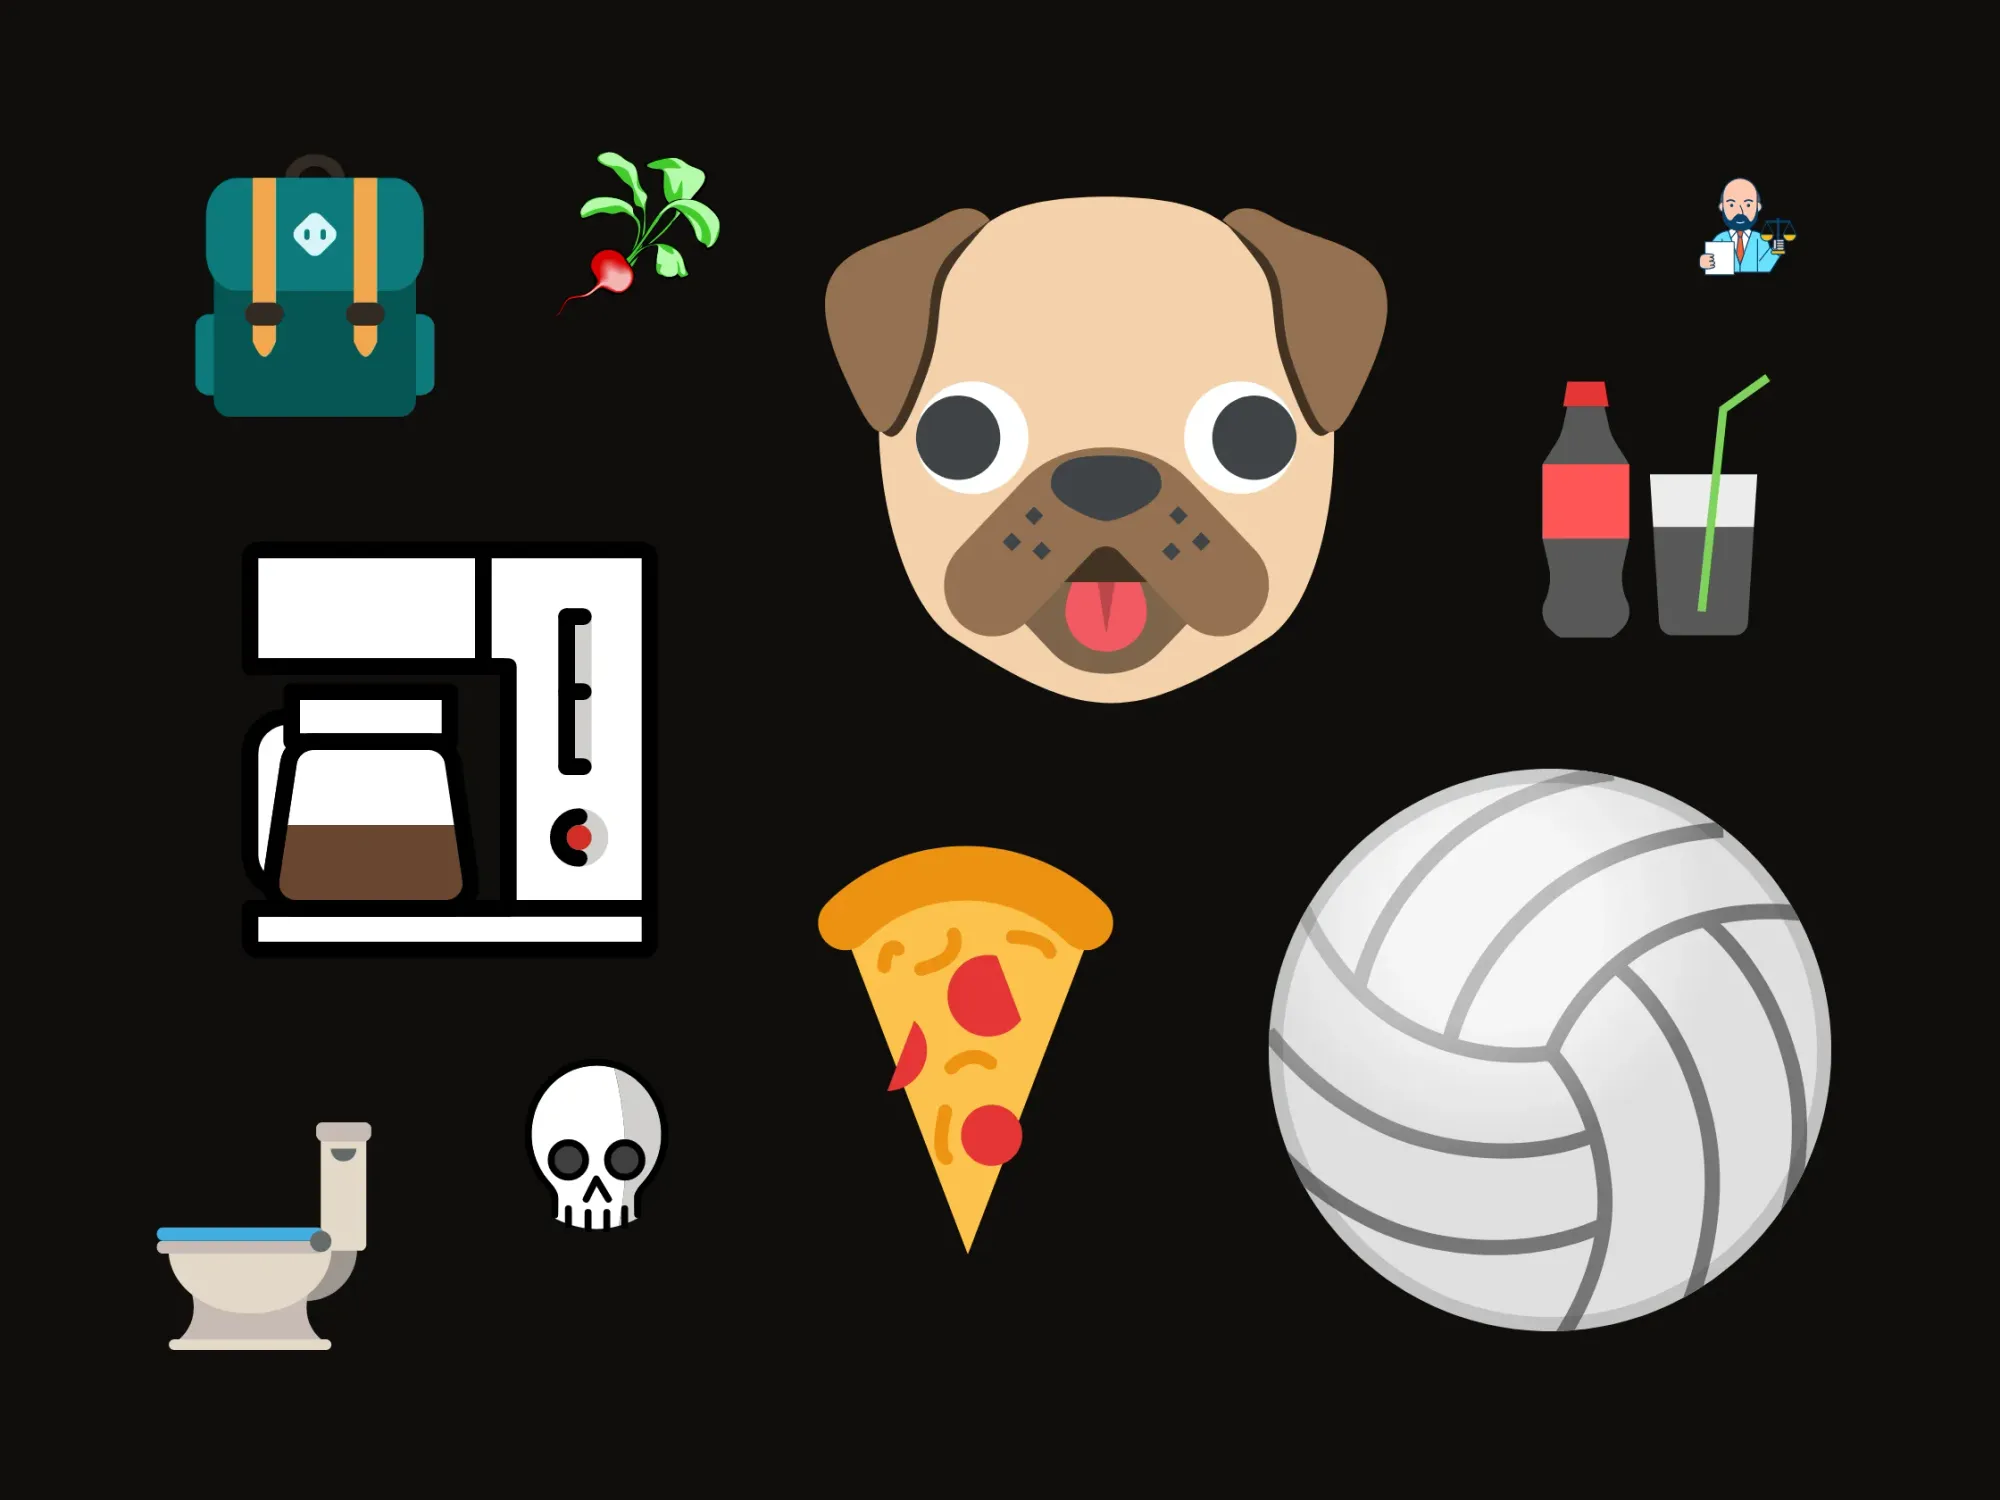 Assortment of random icons including a backpack, coffee maker, radish, toilet, skull, pizza, volleyball, soda, and lawyer